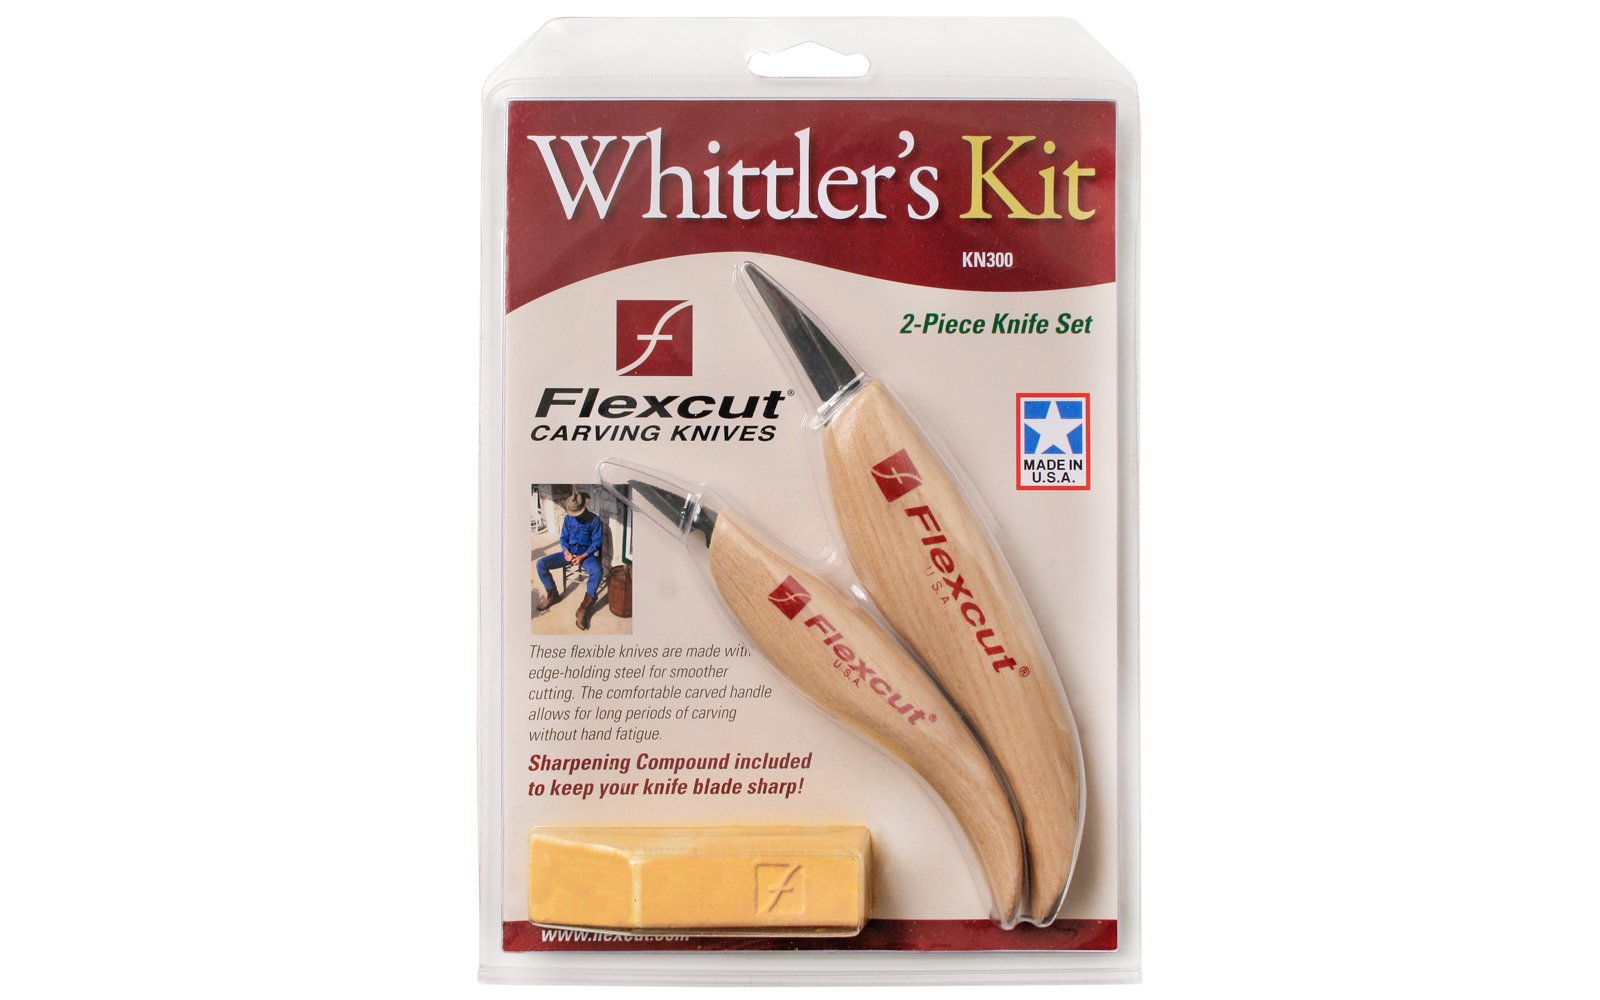 Flexcut Whittler's Knife Kit ~ KN300 - Made in USA ~ 2-piece Whittler's Knife set is a good whittler knife kit. Included in this set are the Flexcut KN13 Detail Knife, & KN27 Mini-Detail Knife - Whittler's Knife Kit - Two piece set ~ 2-knife kit ~ Flexcut Whittler's Knife Set